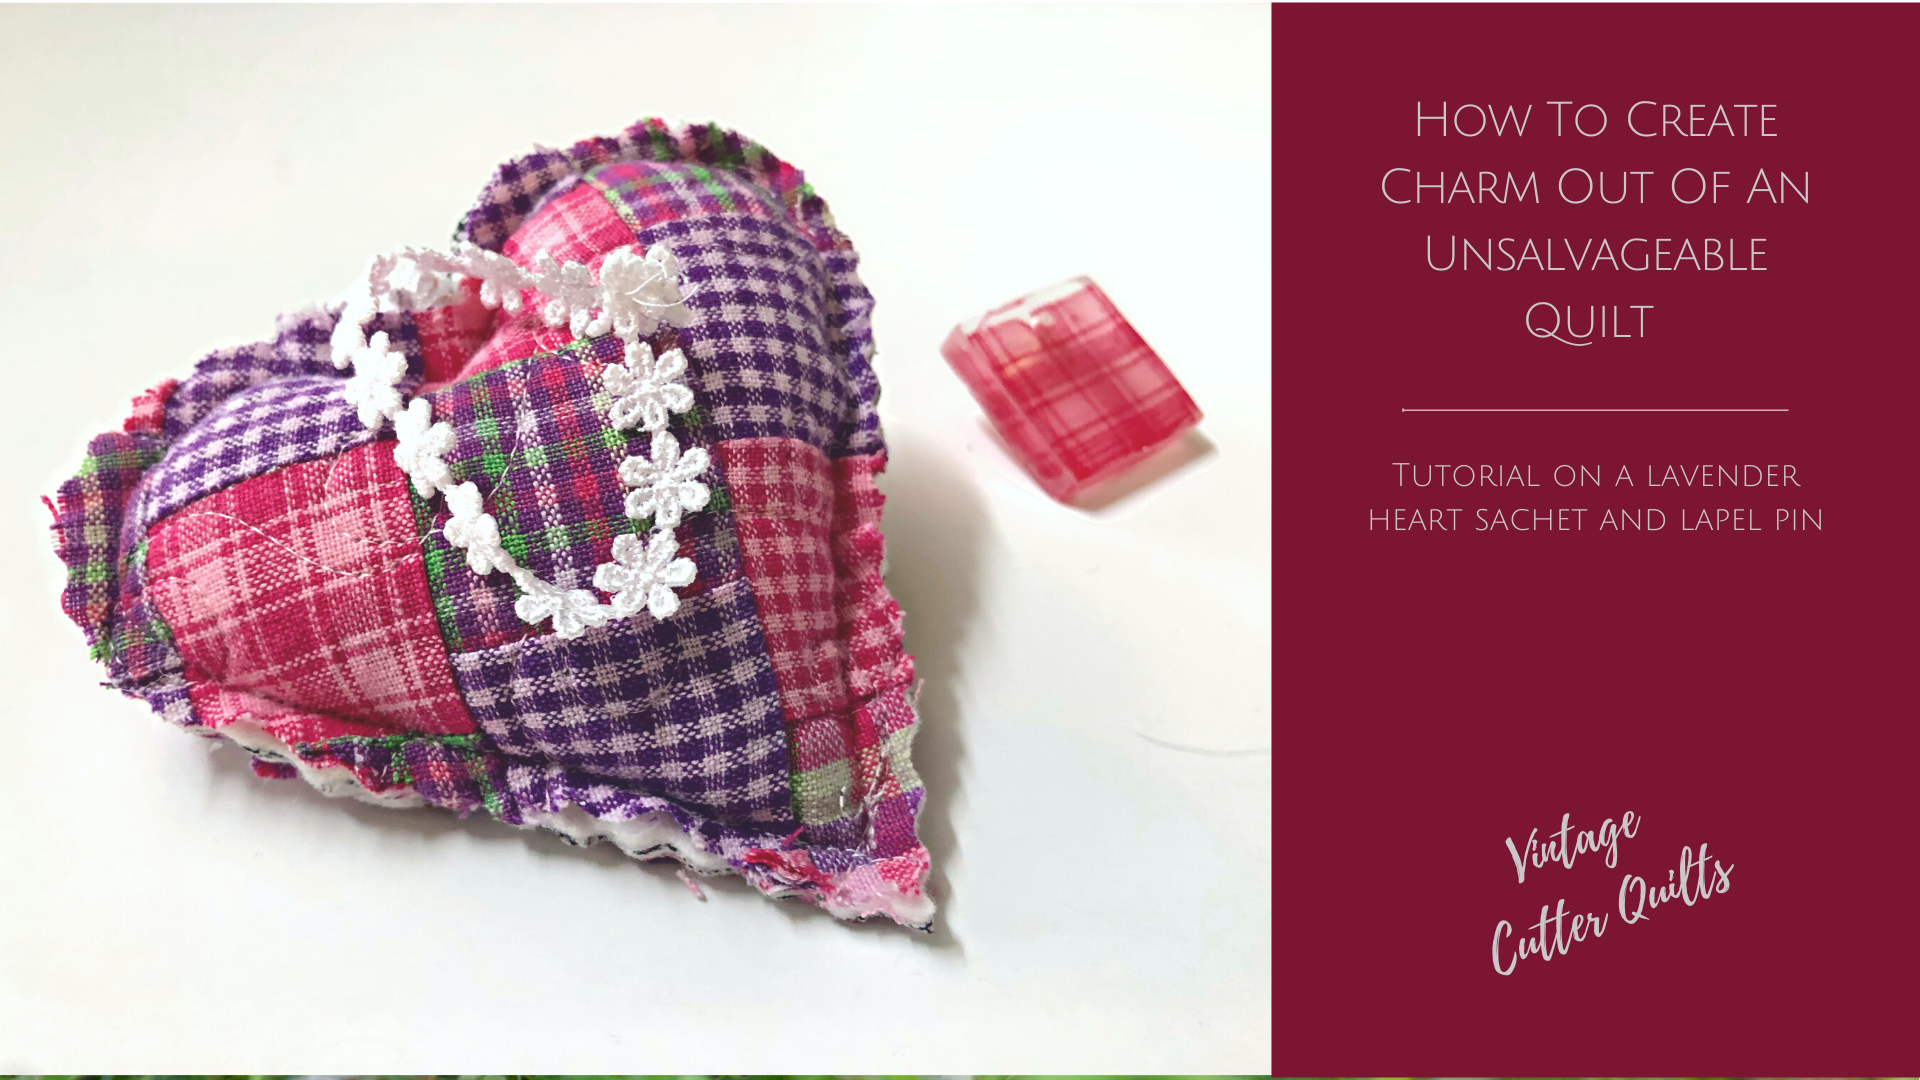 How to Create Charm out of an Unsalvageable Quilt